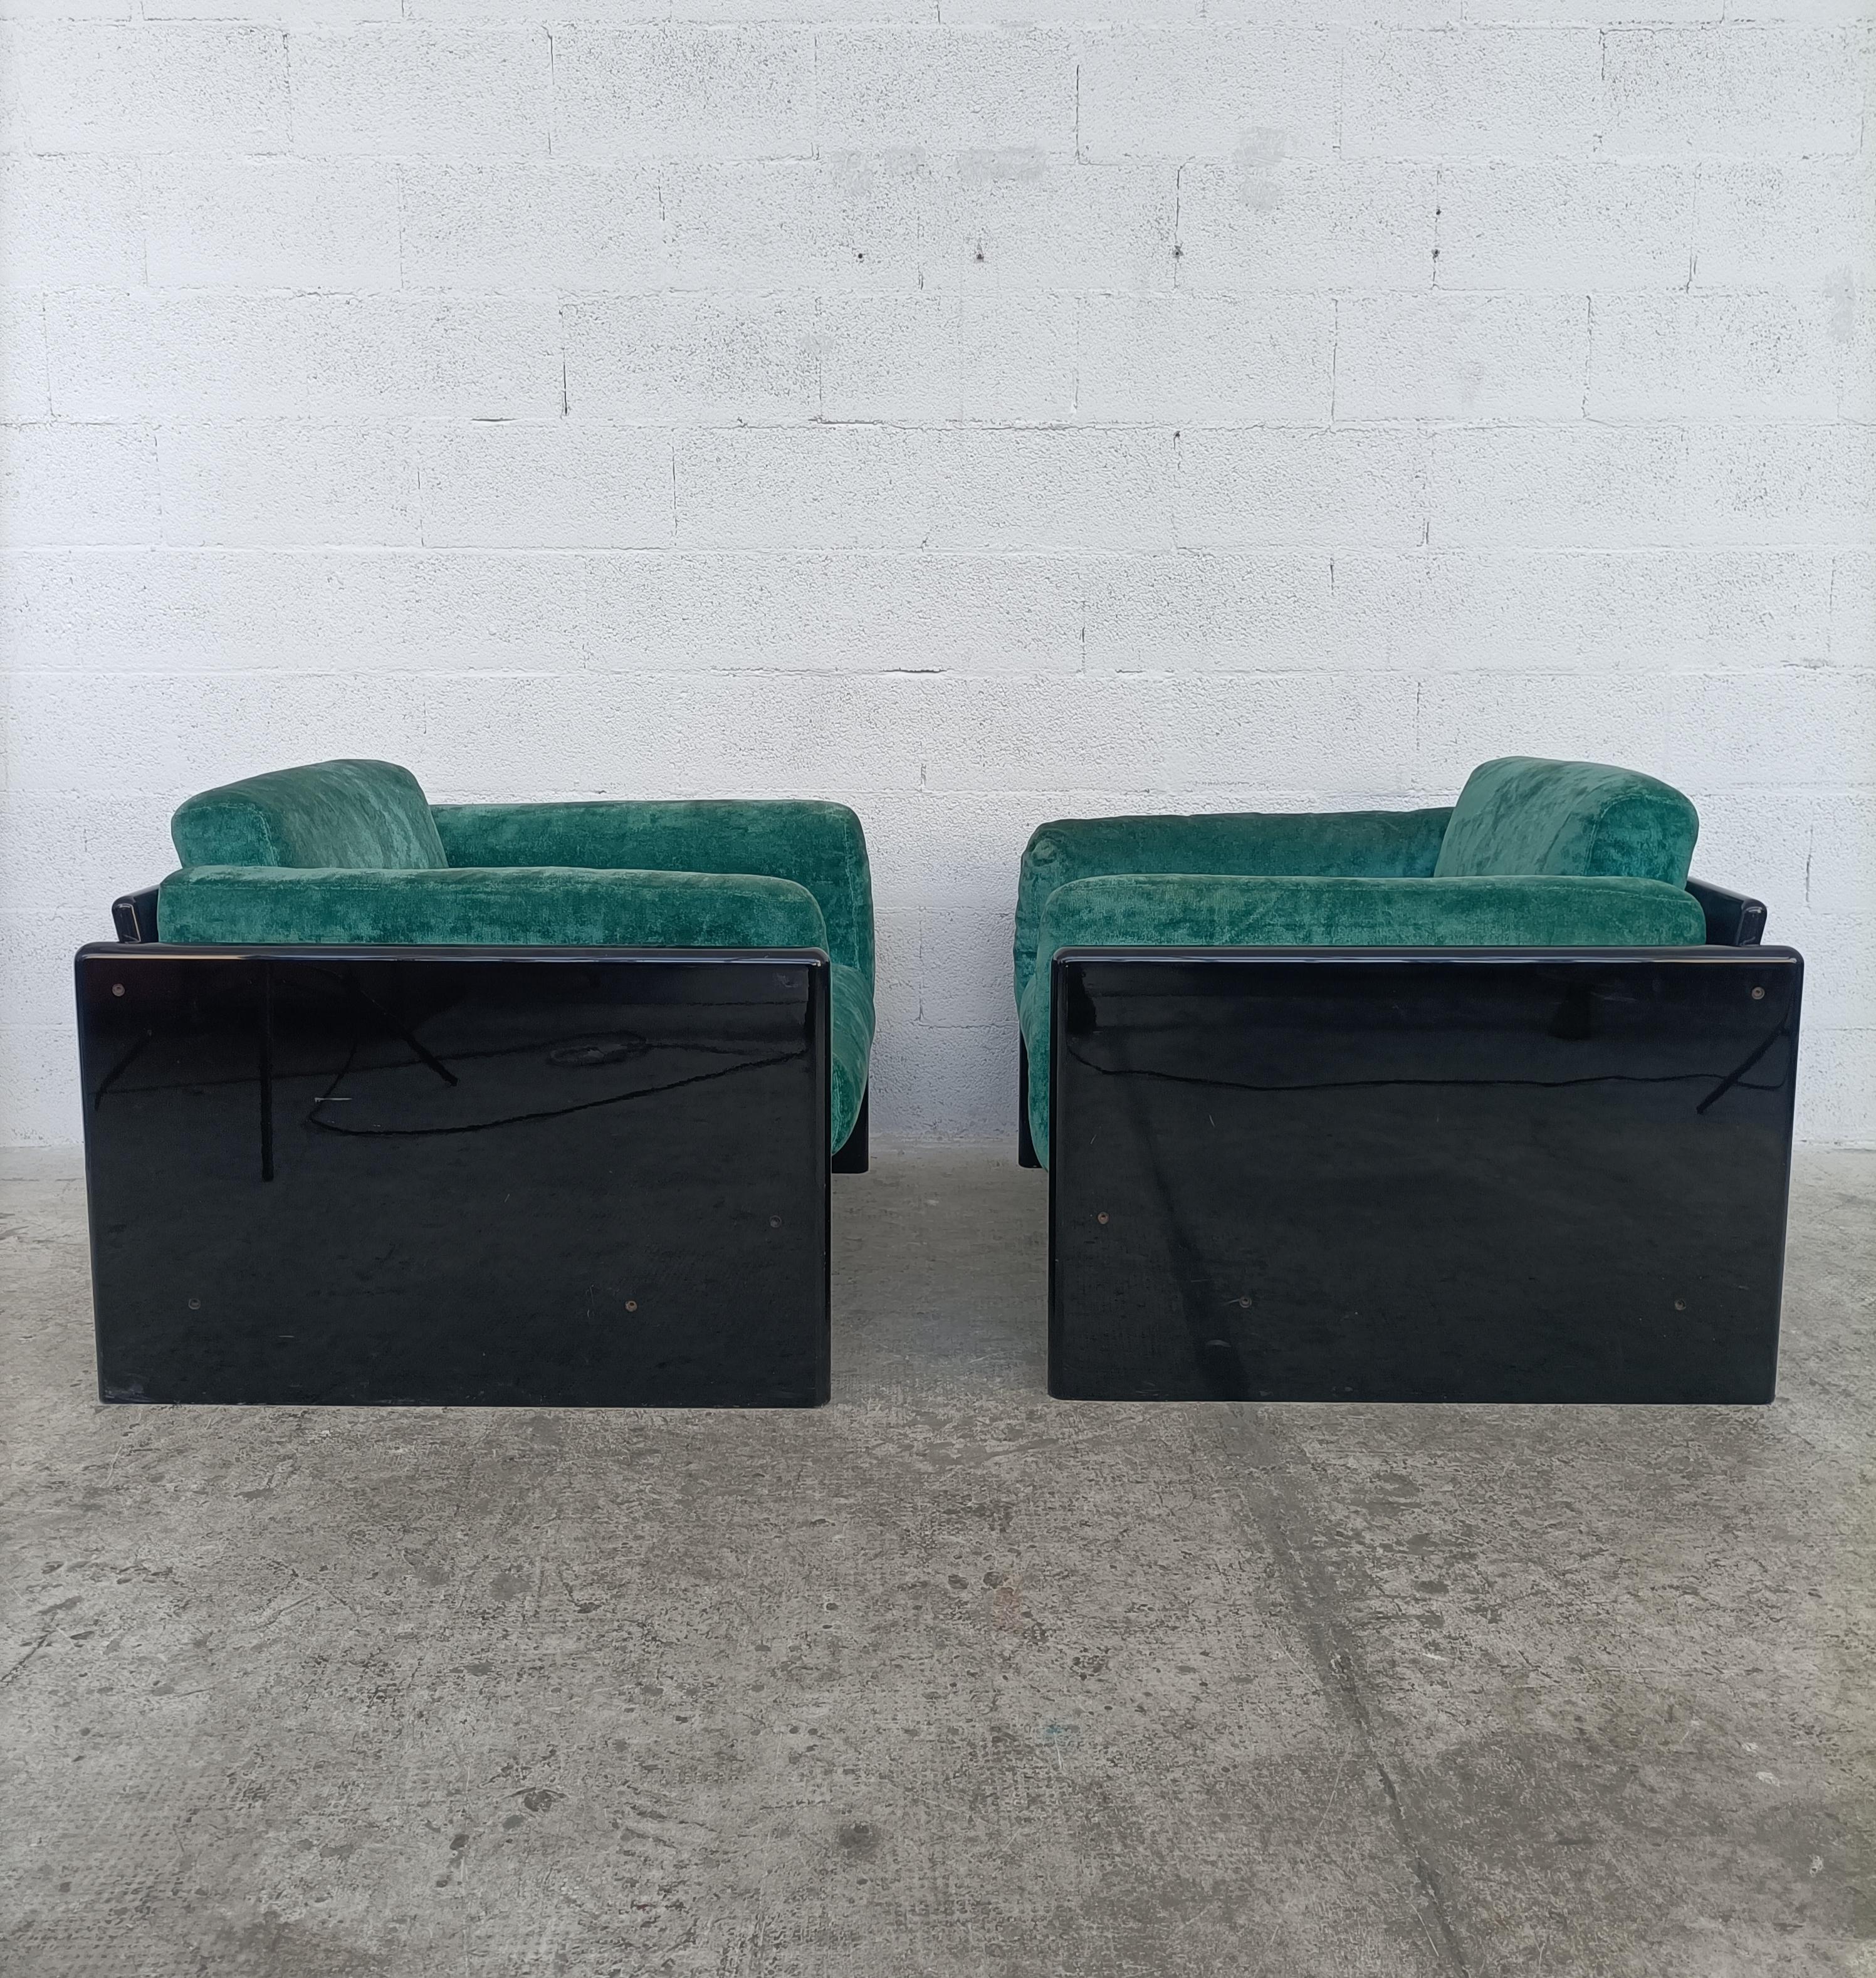 Rare pair of green velvet armchairs, designed by Dino Gavina and Maria Simoncini for Simon International 1970s.
Striking pair of armchairs with a black lacquered high gloss wooden frame and the original shiny green velvet upholstery. A great design